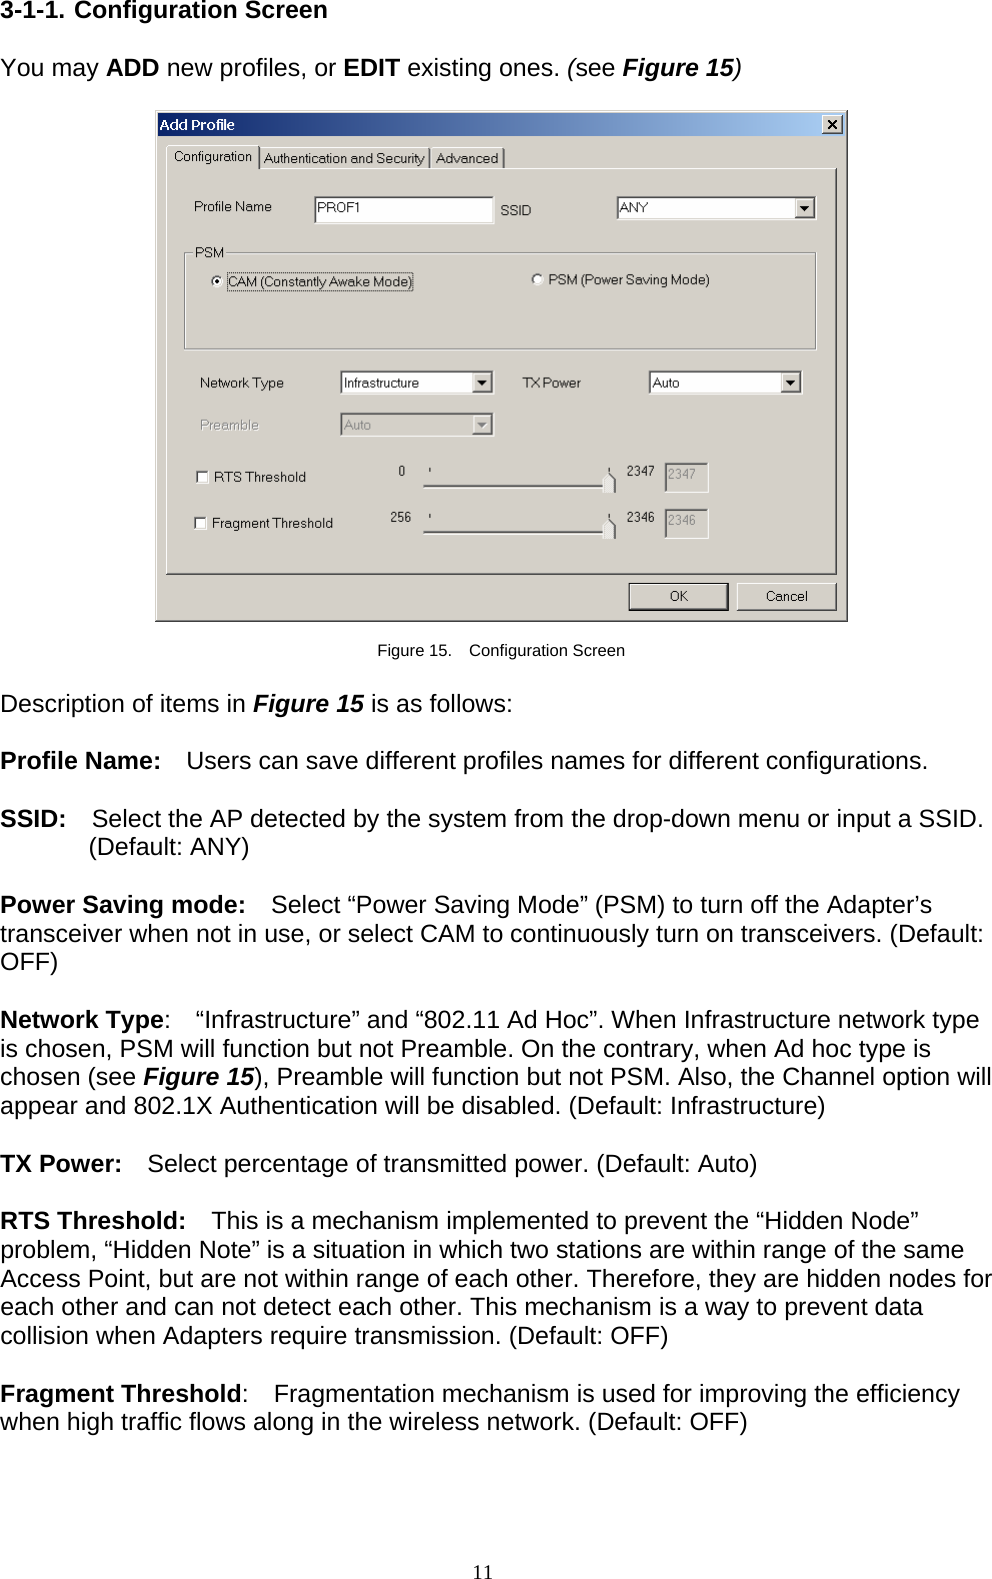 11   3-1-1. Configuration Screen  You may ADD new profiles, or EDIT existing ones. (see Figure 15)    Figure 15.  Configuration Screen  Description of items in Figure 15 is as follows:  Profile Name:    Users can save different profiles names for different configurations.  SSID:  Select the AP detected by the system from the drop-down menu or input a SSID. (Default: ANY)  Power Saving mode:    Select “Power Saving Mode” (PSM) to turn off the Adapter’s transceiver when not in use, or select CAM to continuously turn on transceivers. (Default: OFF)  Network Type:  “Infrastructure” and “802.11 Ad Hoc”. When Infrastructure network type is chosen, PSM will function but not Preamble. On the contrary, when Ad hoc type is chosen (see Figure 15), Preamble will function but not PSM. Also, the Channel option will appear and 802.1X Authentication will be disabled. (Default: Infrastructure)  TX Power:    Select percentage of transmitted power. (Default: Auto)  RTS Threshold:    This is a mechanism implemented to prevent the “Hidden Node” problem, “Hidden Note” is a situation in which two stations are within range of the same Access Point, but are not within range of each other. Therefore, they are hidden nodes for each other and can not detect each other. This mechanism is a way to prevent data collision when Adapters require transmission. (Default: OFF)  Fragment Threshold:    Fragmentation mechanism is used for improving the efficiency when high traffic flows along in the wireless network. (Default: OFF)    